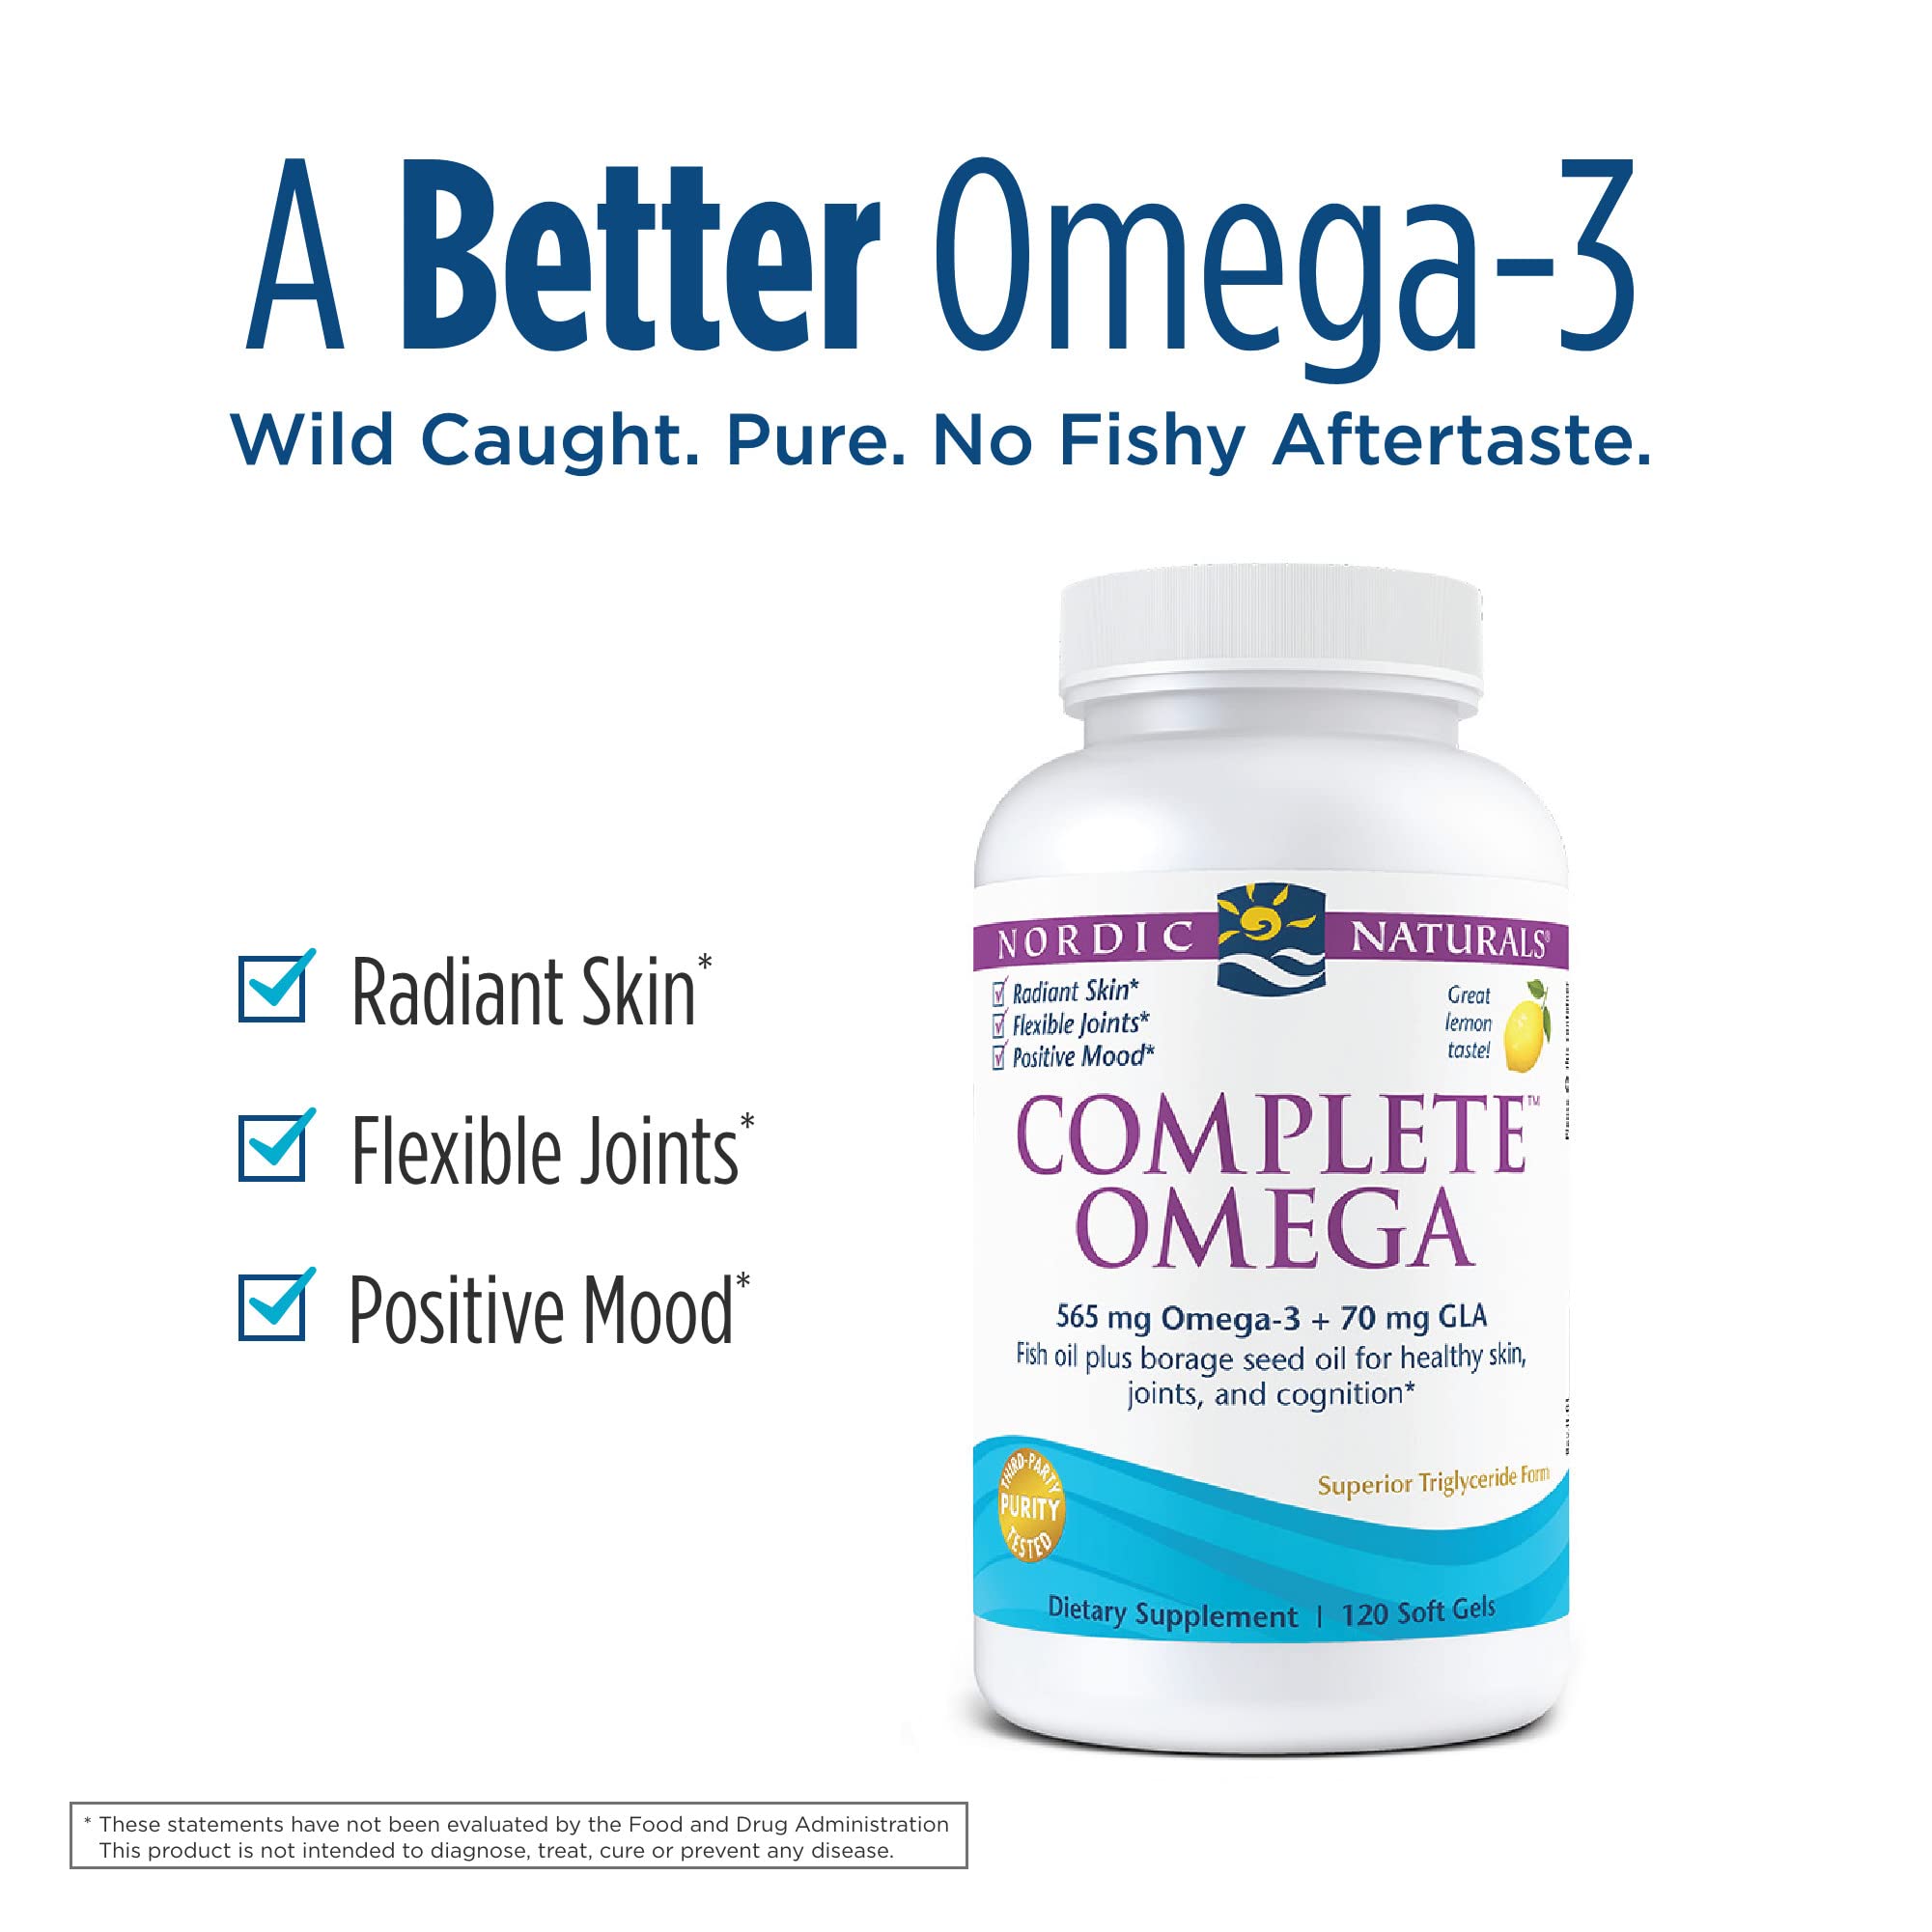 Nordic Naturals - Complete Omega, Supports Healthy Skin, Joints, and Cognition, 120 Soft Gels